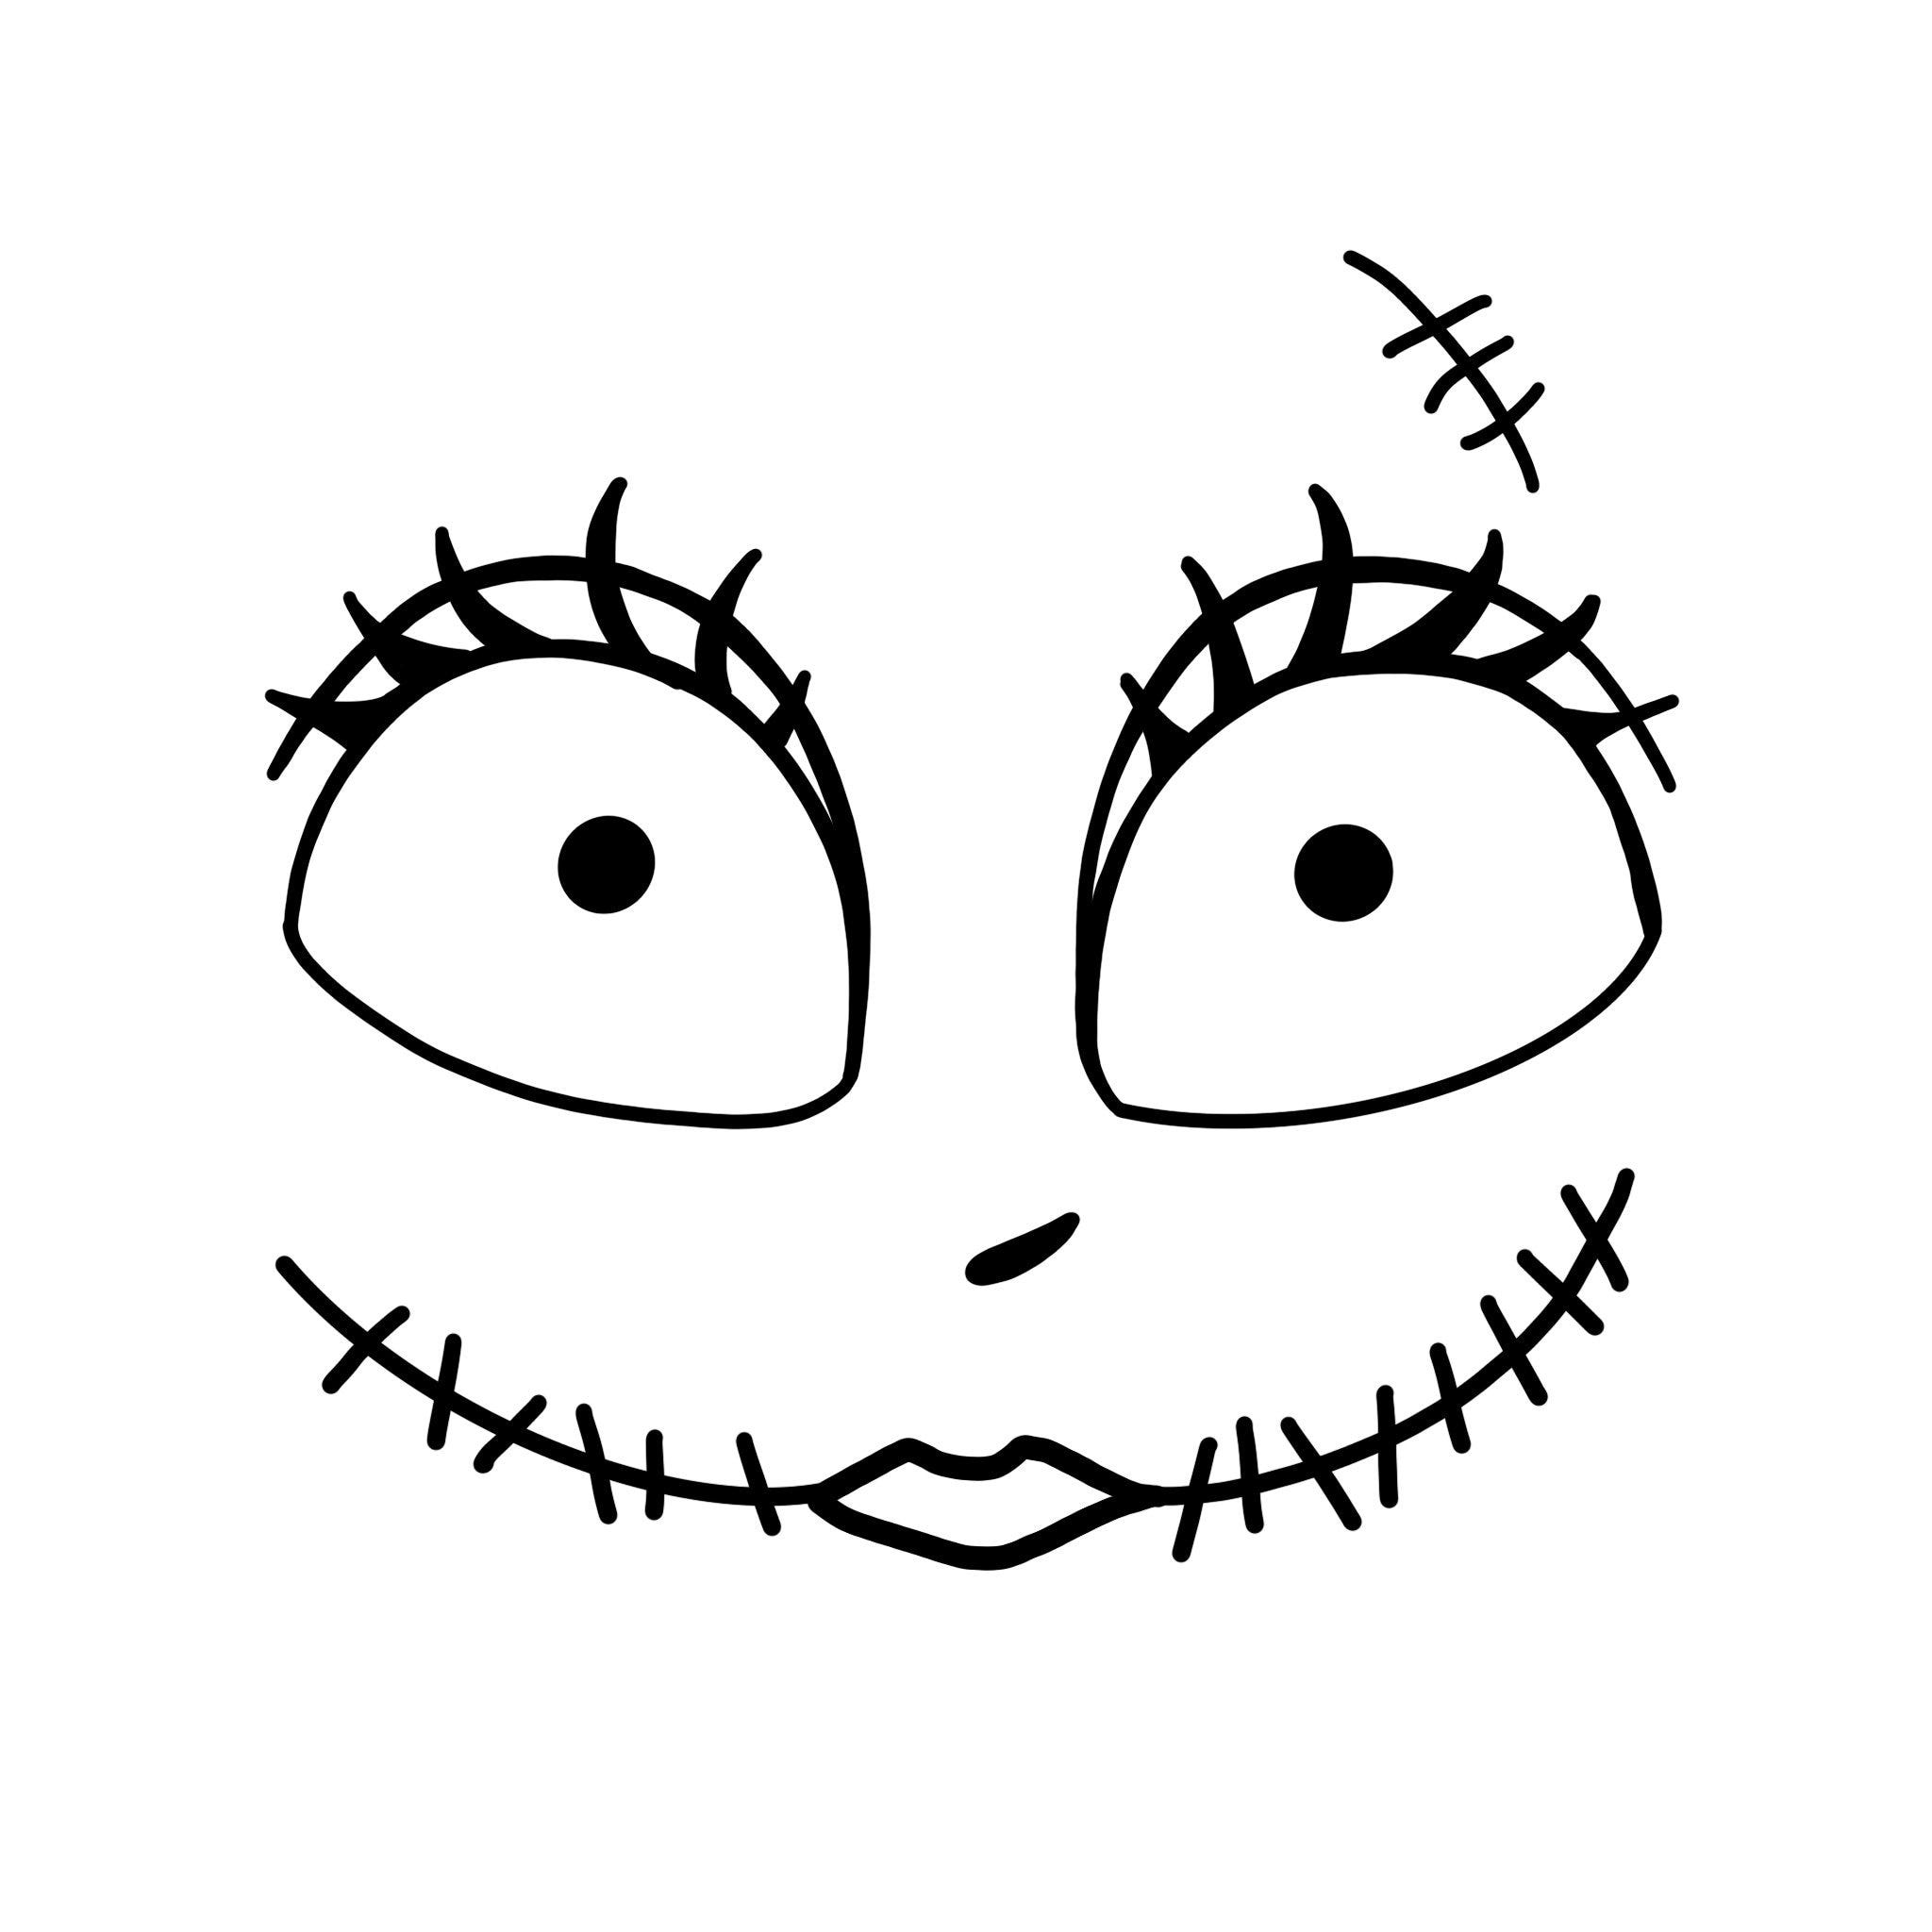 Sally Face Digital Files (The Nightmare Before Christmas) - PDF/PNG/SVG/Jpeg - Halloween Coloring Pages, Pumpkin Carving Stencil